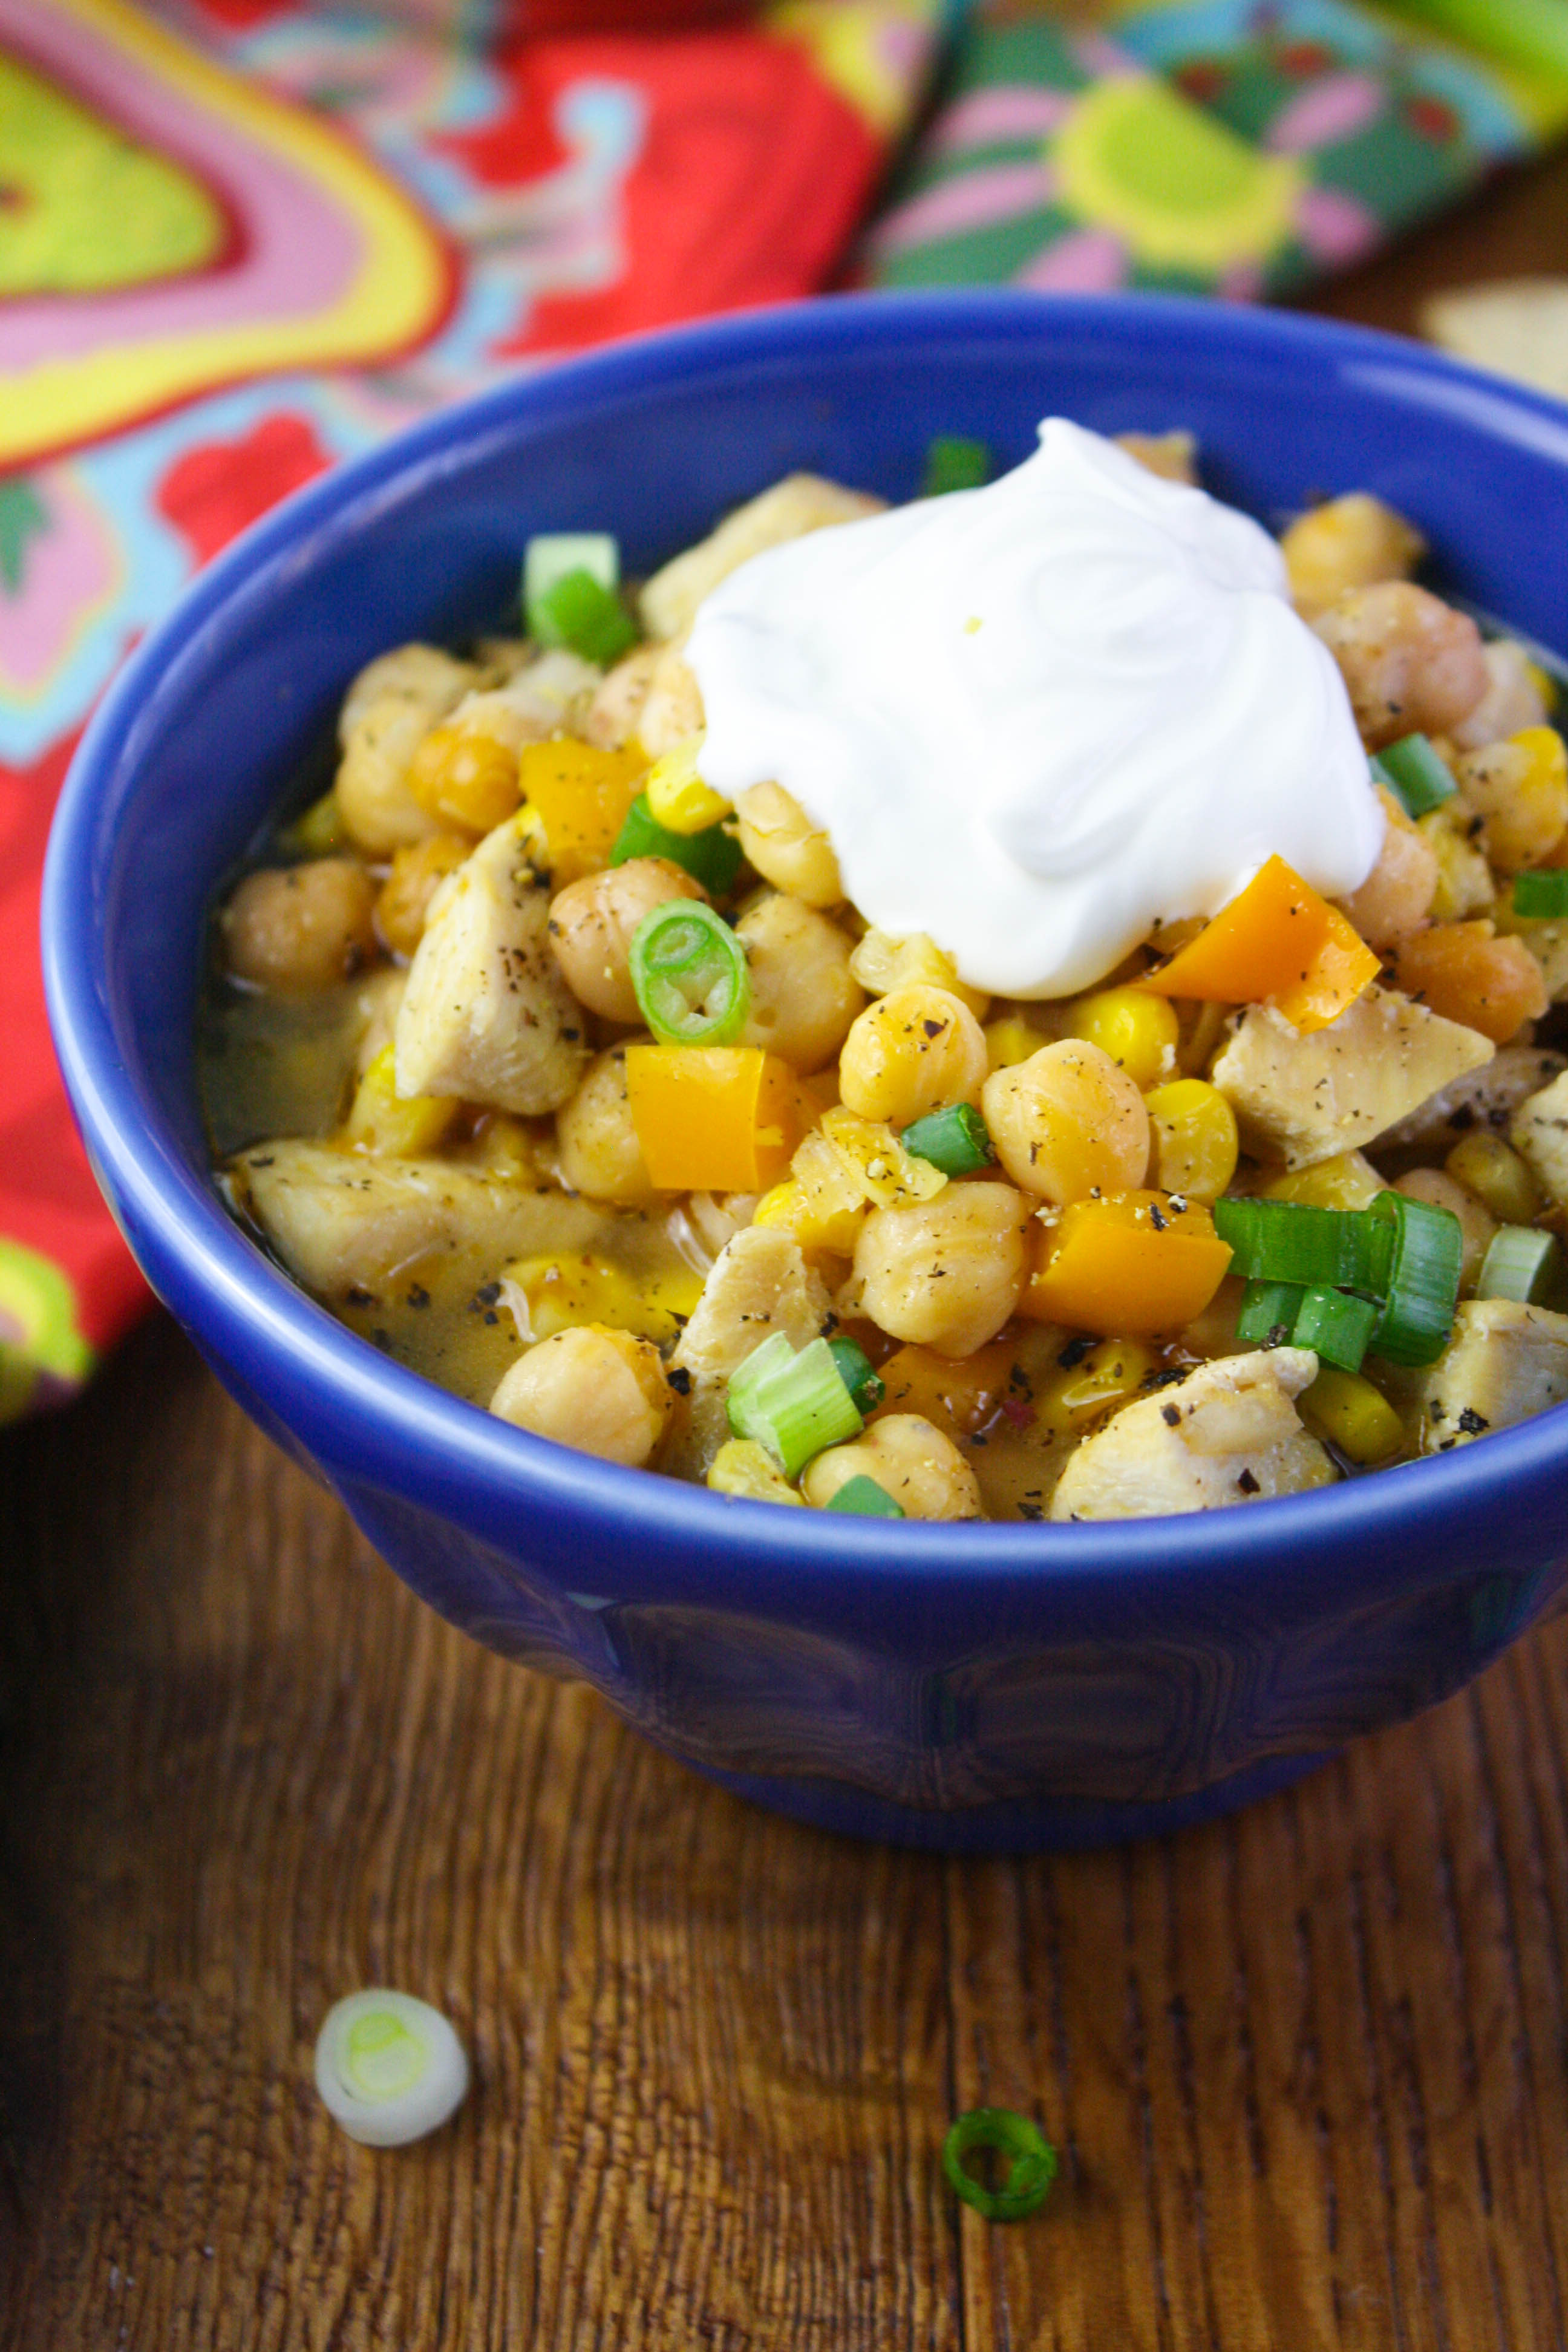 Easy Chicken and Chickpea Chili is just what you'll want when it's cold out! This chili dish is a treat anytime, but it's perfect for the cold weather!